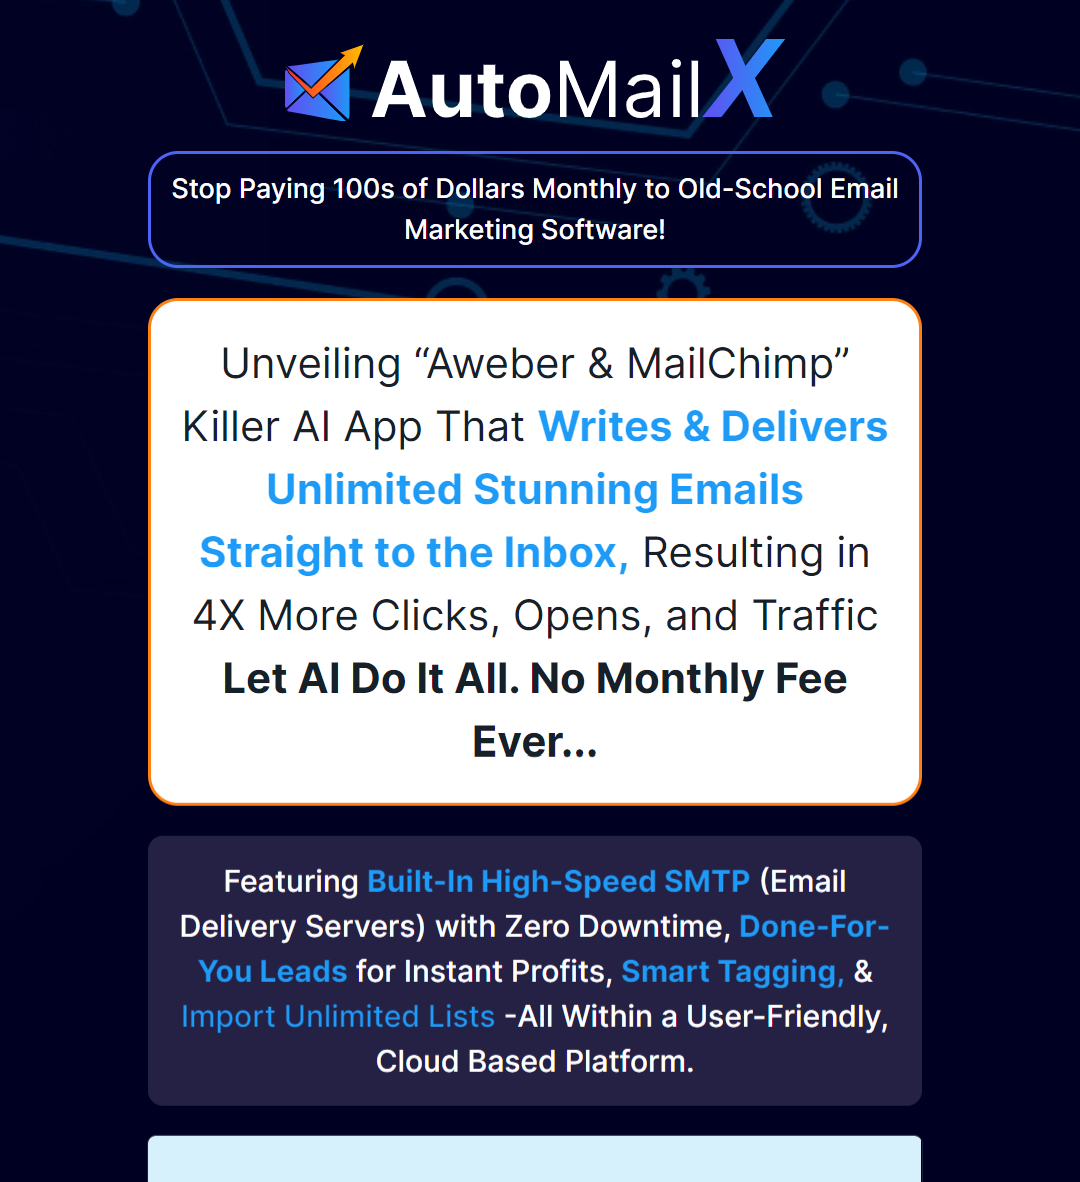 AutomailX Special AutoMailX Ai - Unveiling “Aweber and MailChimp” KilIer AI App That Writes and Delivers Unlimited Stunning Emails Straight to the Inbox, Resulting in 4X More Clicks, Opens, and Traffic.